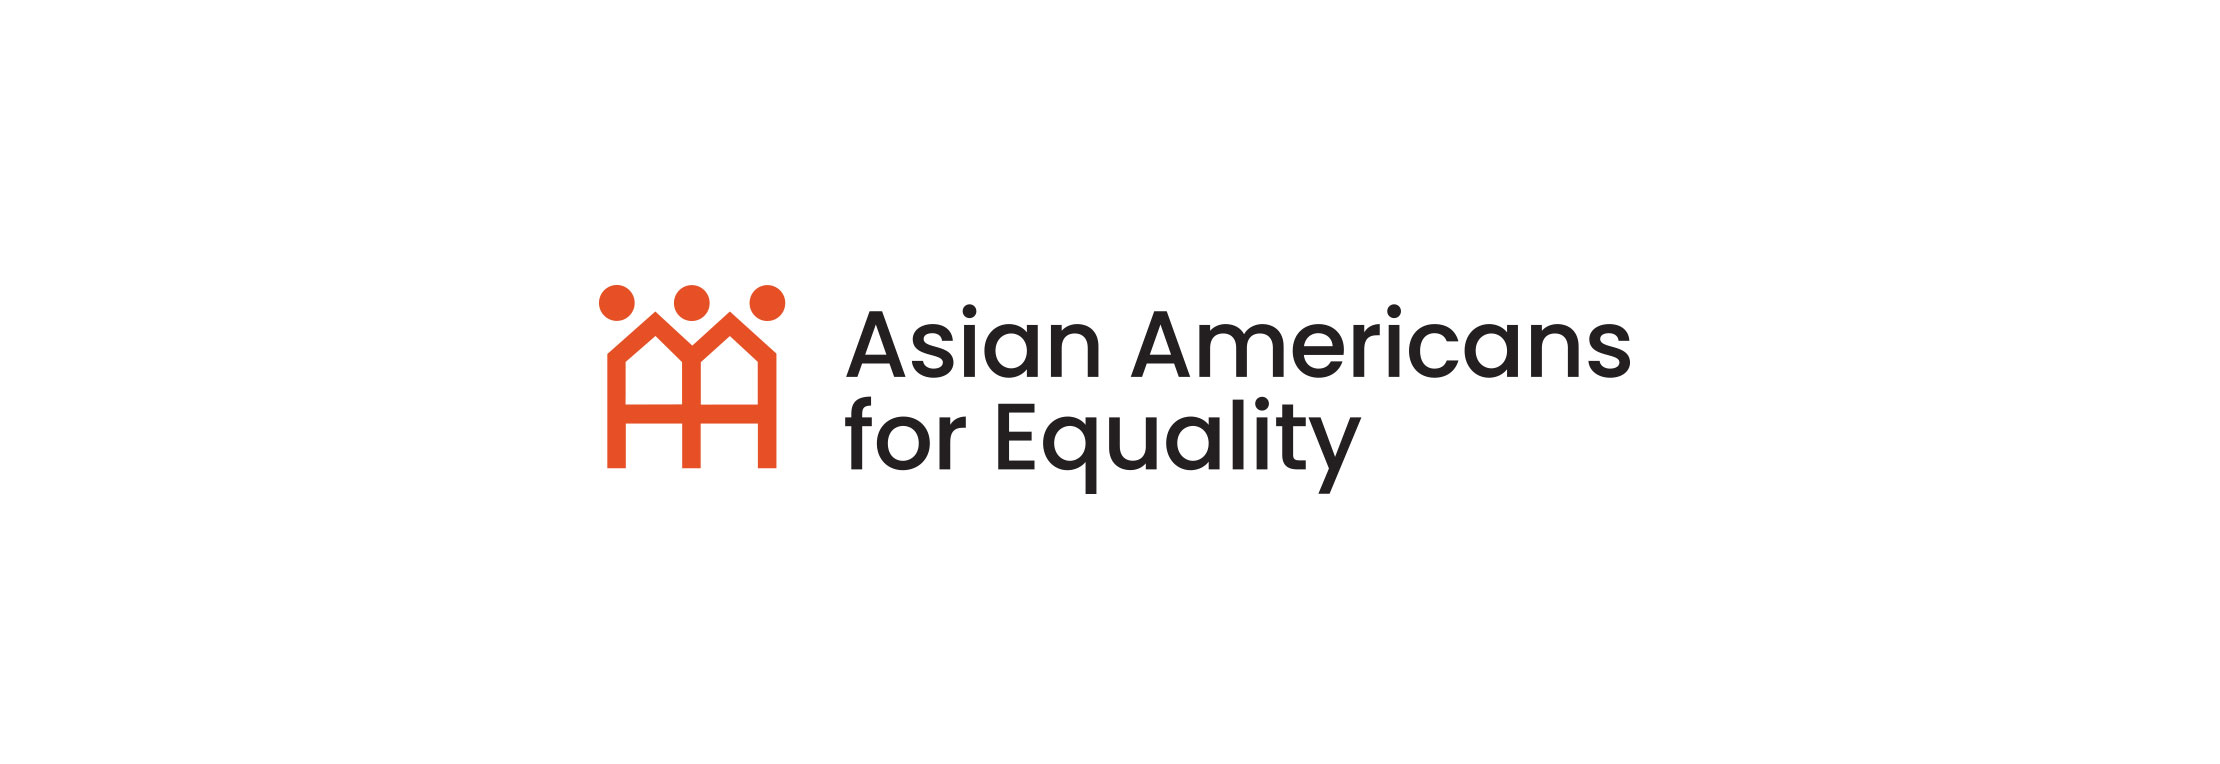 asian-americans-for-equality-1-logo